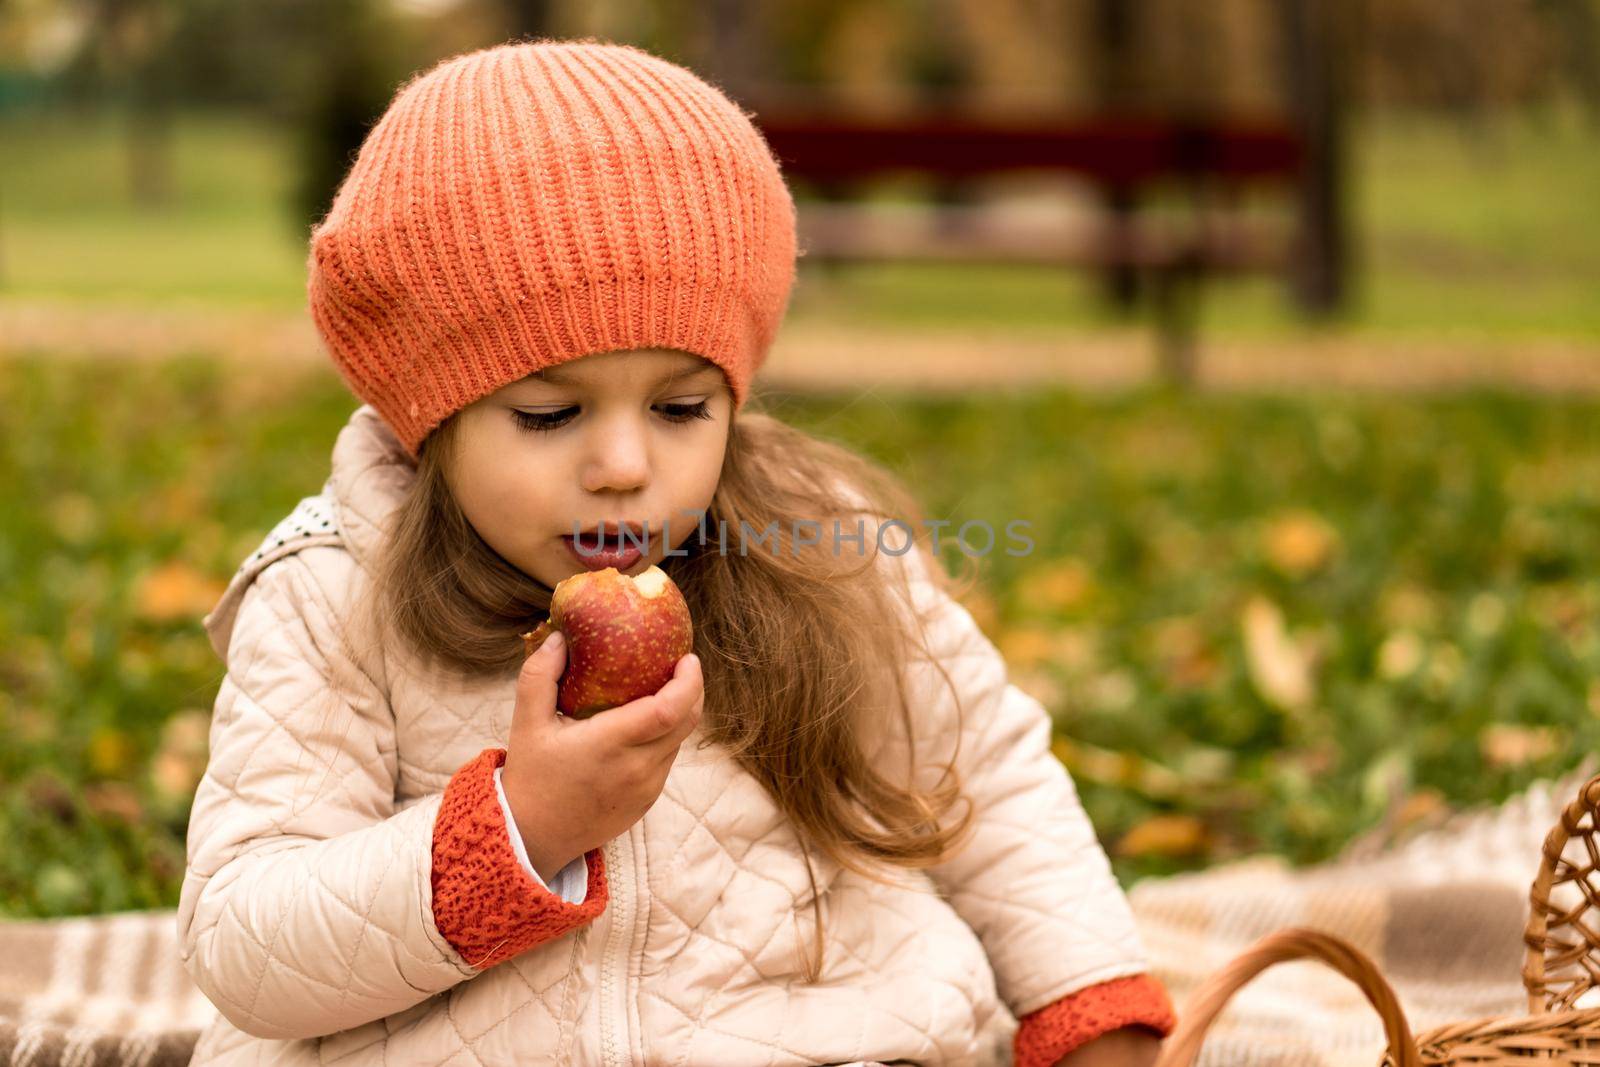 Close Up Portrait Of Little Cute Preschool Minor Girl In Orange Beret On Yellow Fallen Leaves Eats Red Apple Look At Camera Cold Weather In Fall Park. Childhood, Family, Motherhood, Autumn Concept.